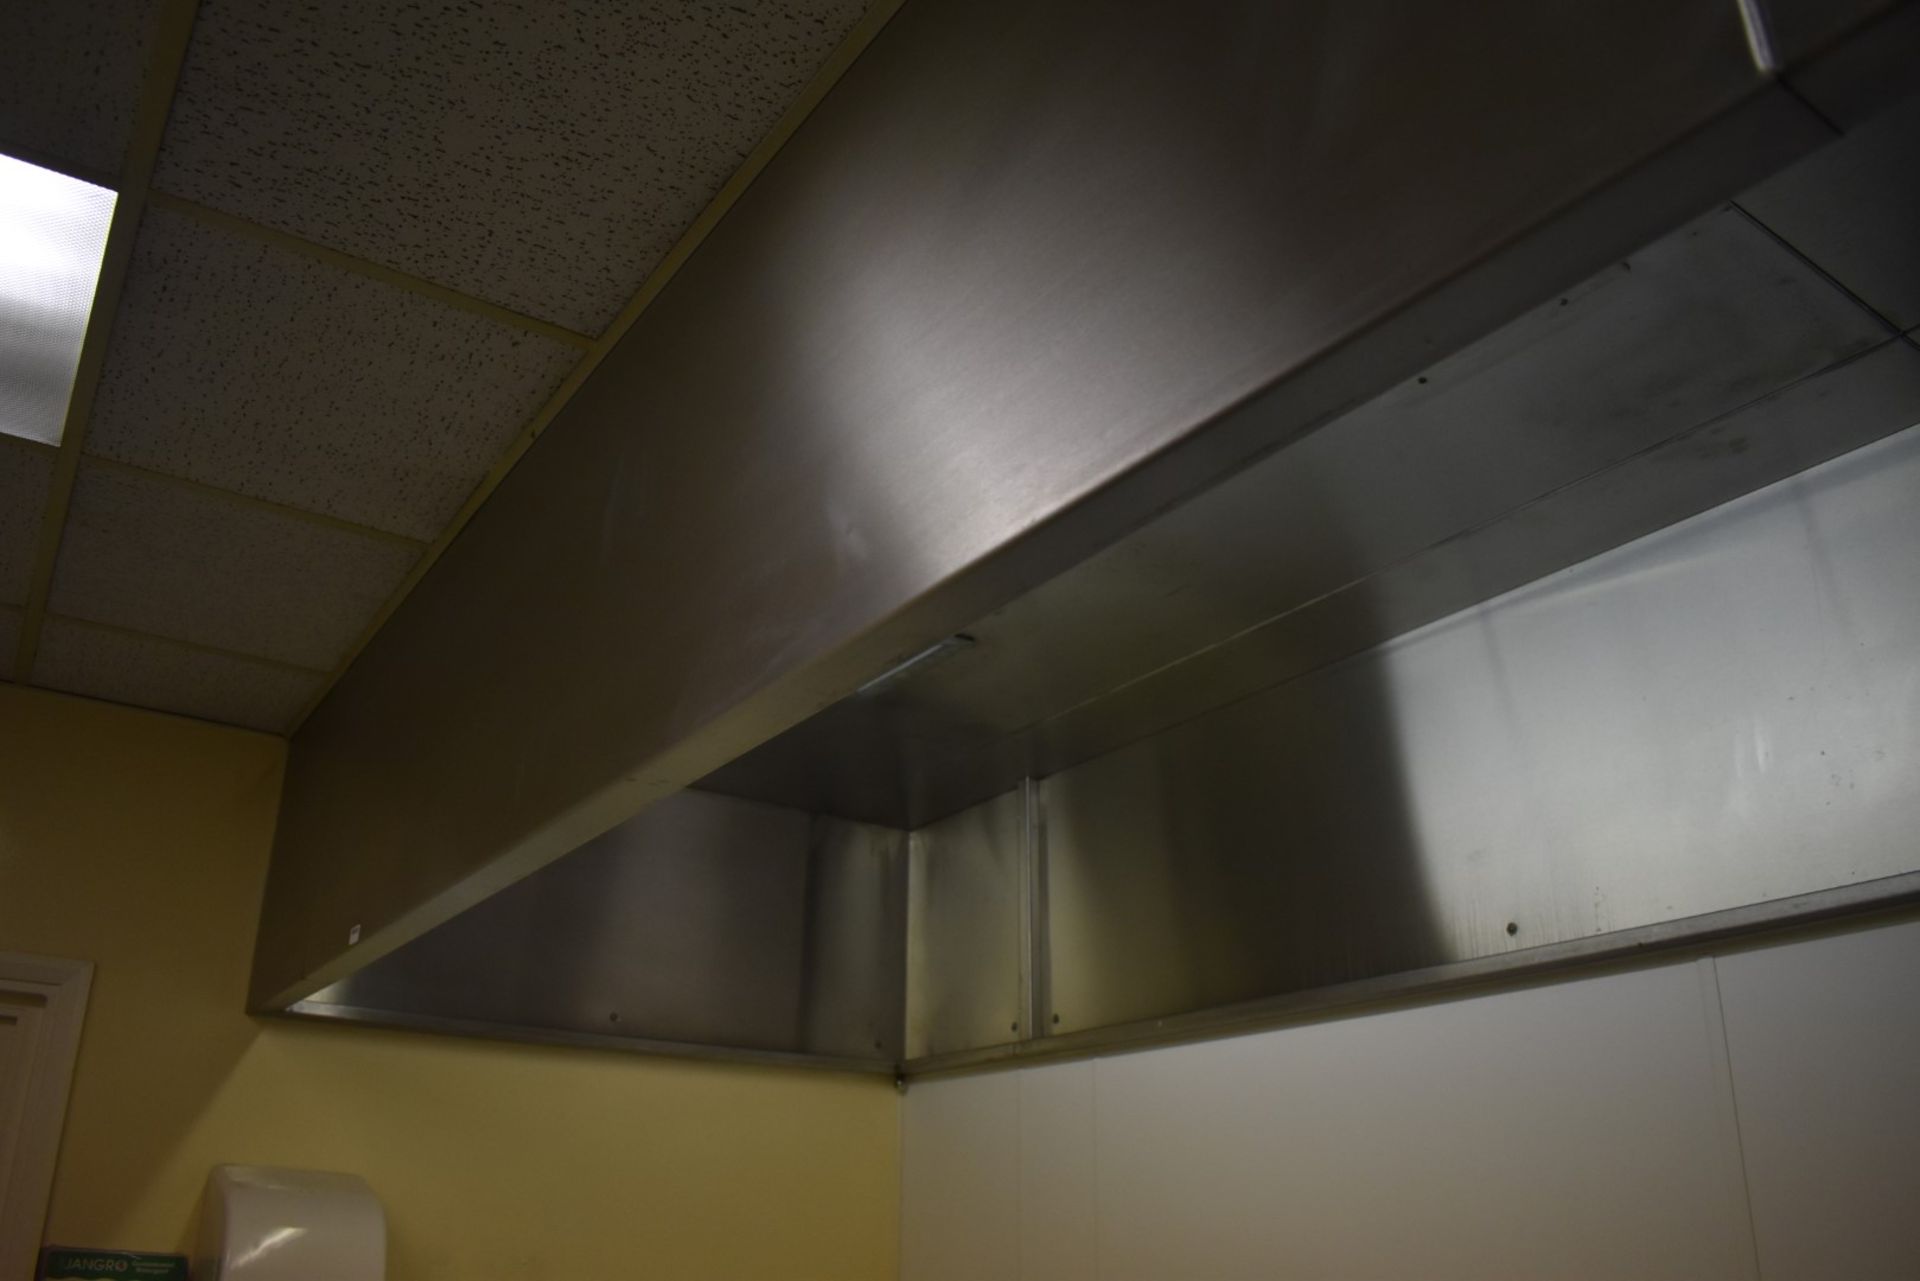 1 x Commerical Kitchen Ceiling Mounted Extractor Hood - Stainless Steel - Breaks into Multiple Parts - Image 8 of 8